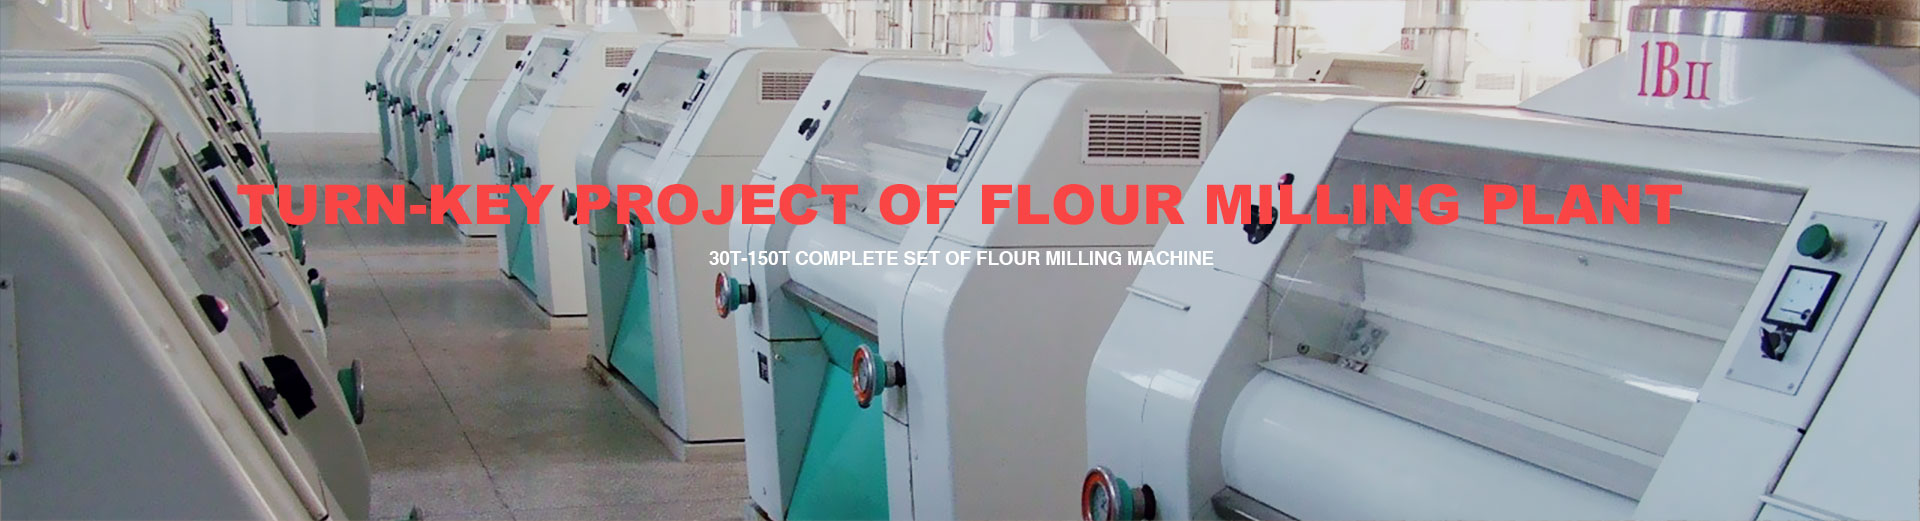 Turn-key project of flor nilling plant